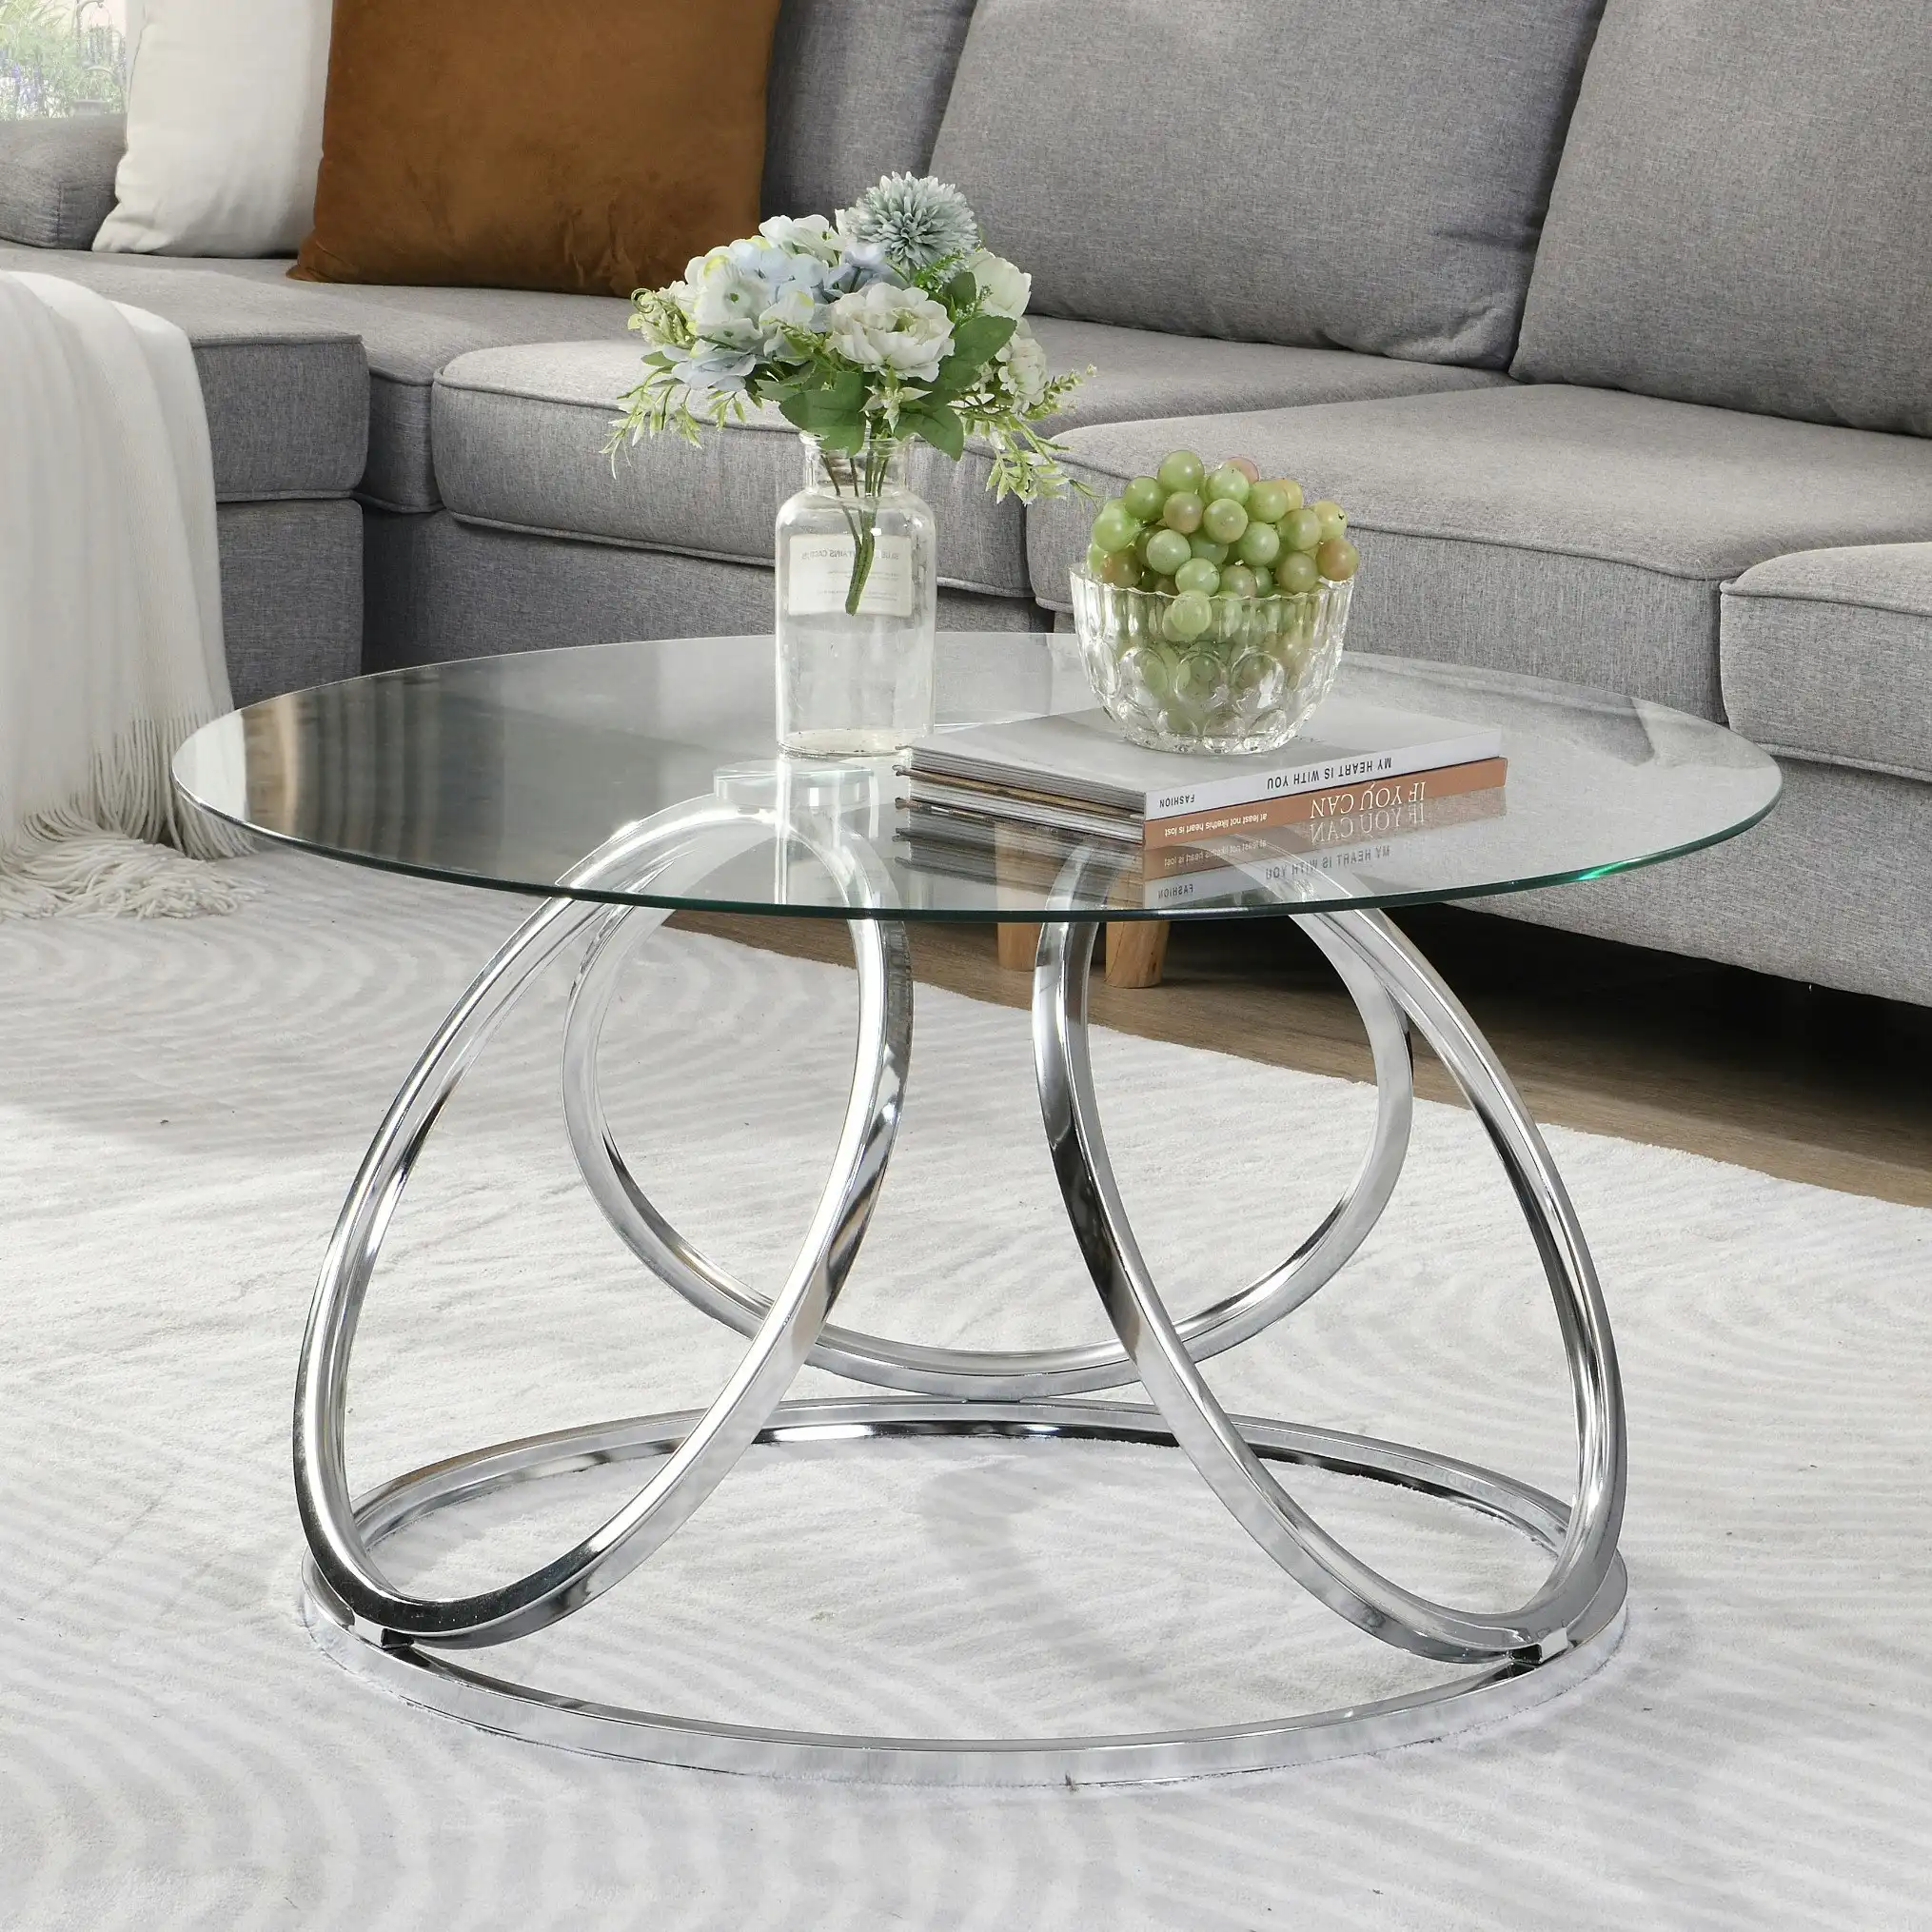 HLIVING Accent Round Coffee Table,Tempered Glass Coffee Table, Chrome Finish